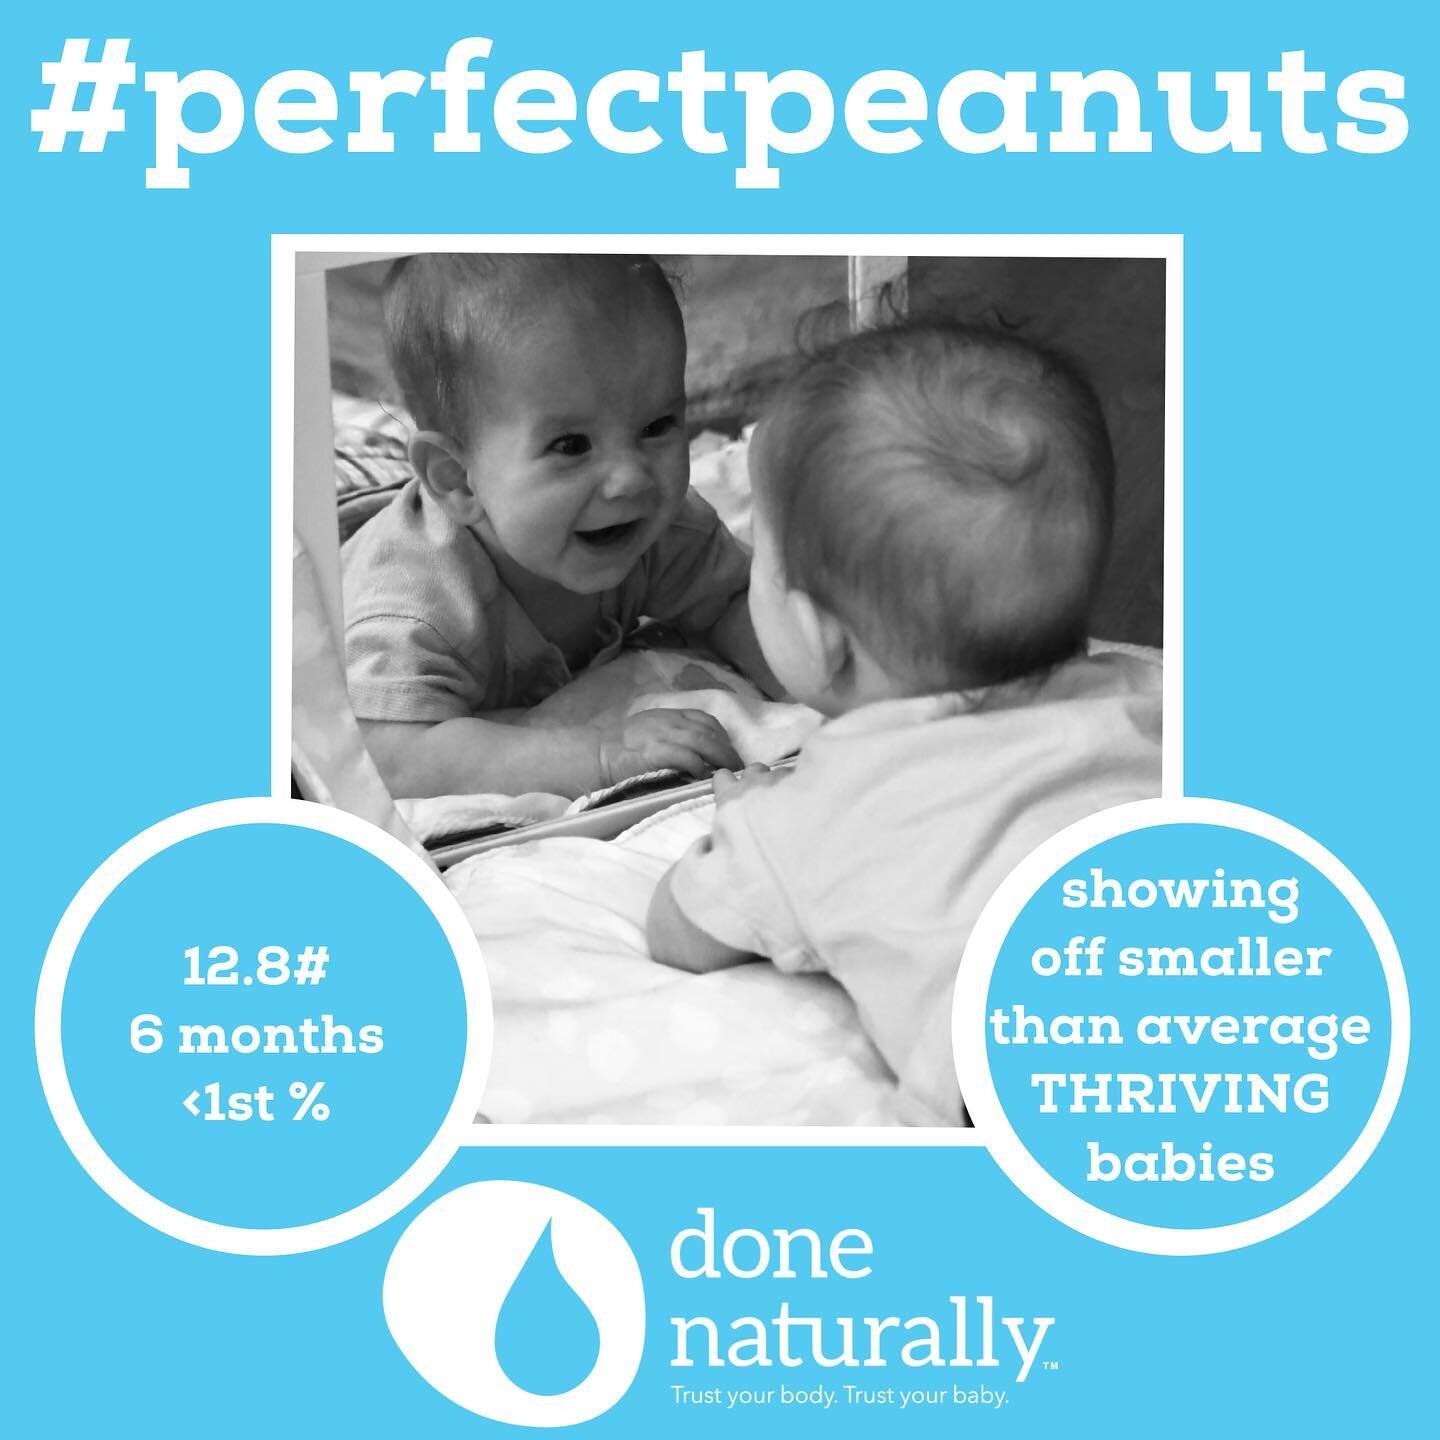 Those that know me know that I am extremely passionate about these, what I call, #perfectpeanuts. These babies need to be seen and shown off. 

It&rsquo;s time to show people that healthy babies come in all sizes! All too often people assume a baby i